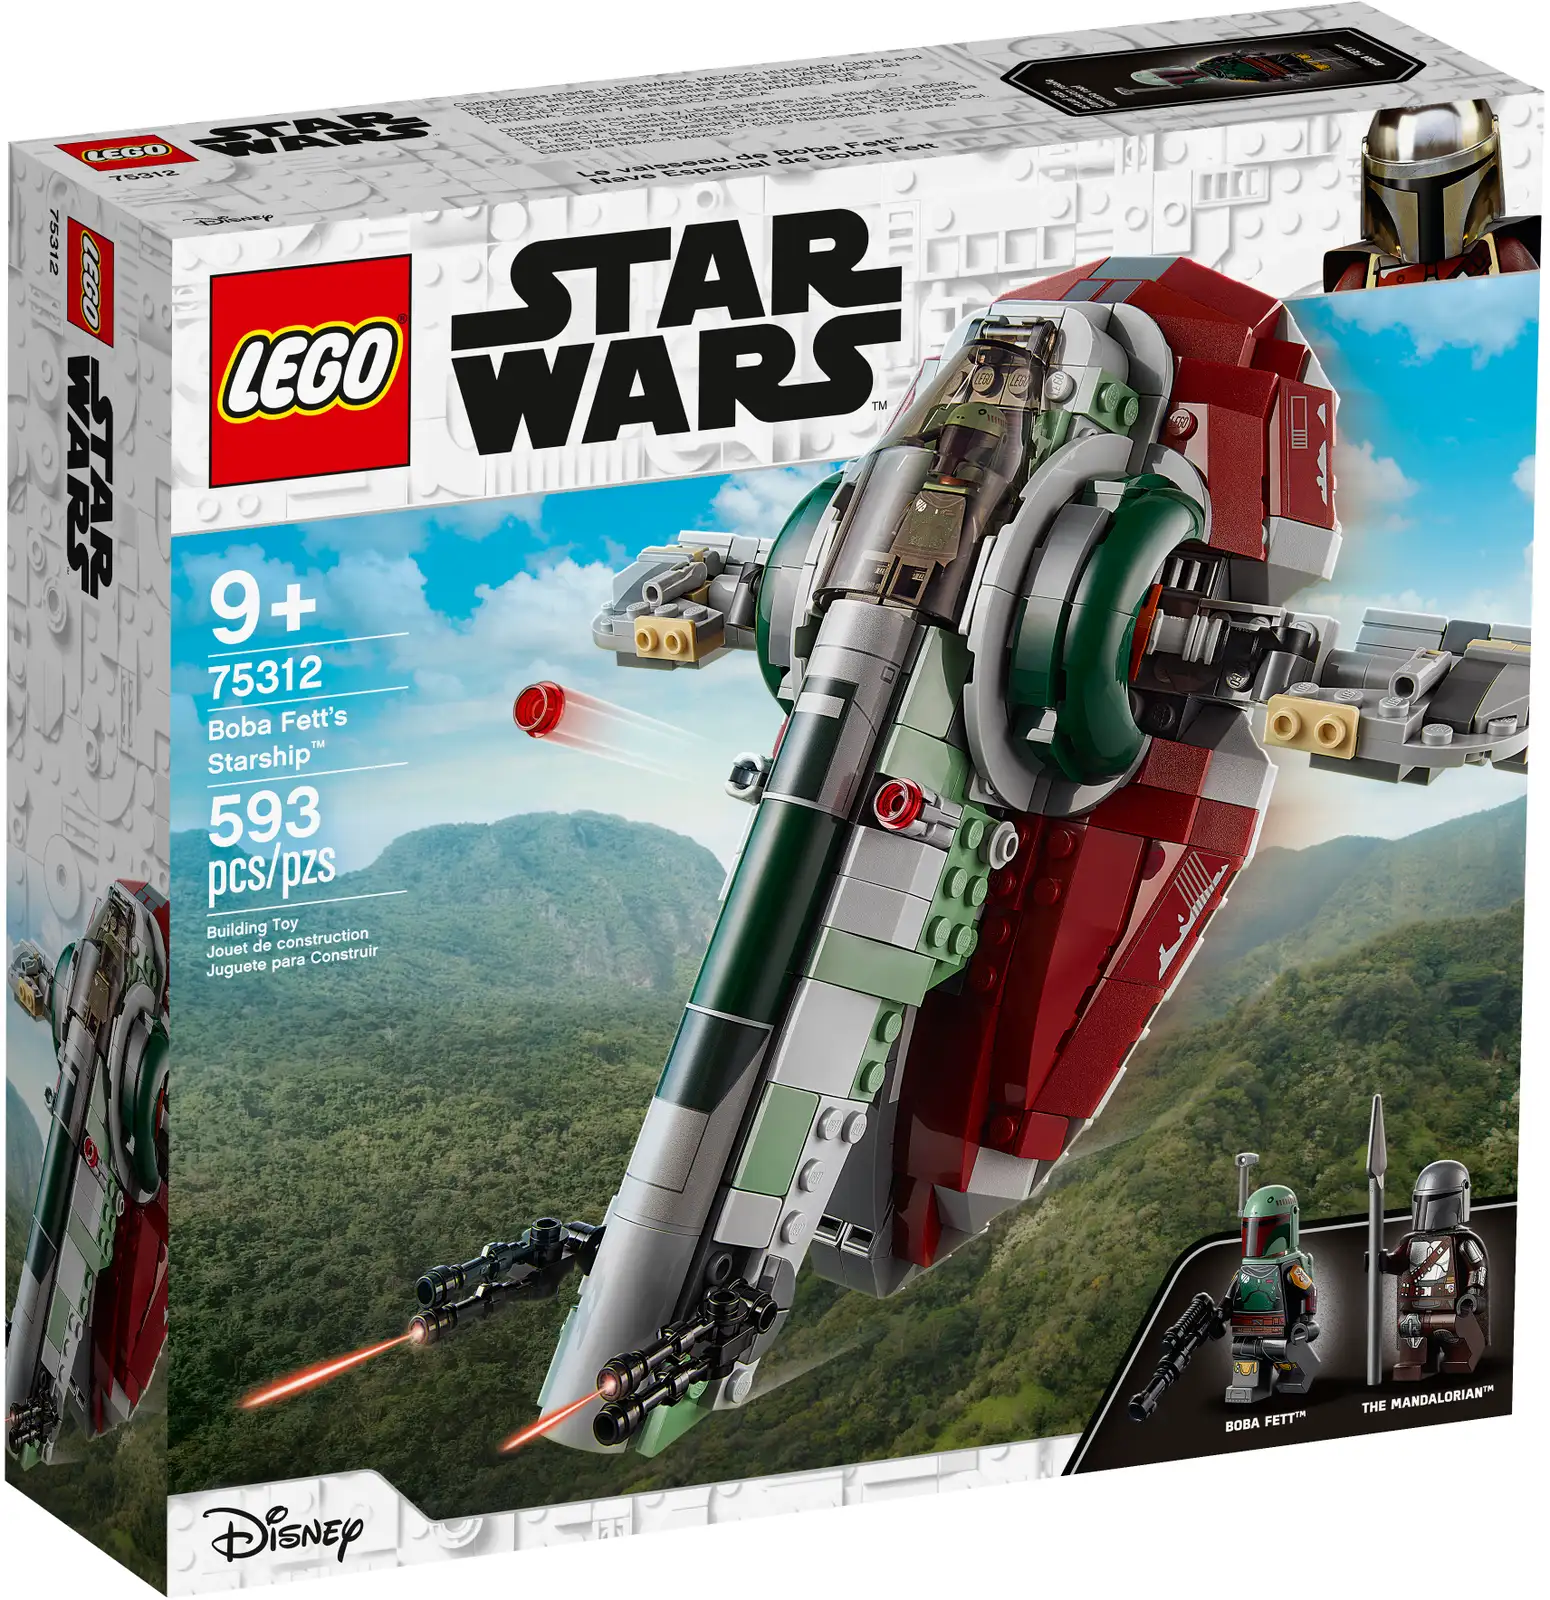 Star Wars: The Mandalorian fans can play out bounty-hunting missions and battles with this brilliant LEGO® brick version of Boba Fett’s Starship (75312). It features a handle for easy flying, an opening LEGO minifigure cockpit, rotating wings, 2 stud shooters and 2 rotating dual blaster cannons (non-shooting). This premium-quality set also includes Boba Fett and The Mandalorian LEGO minifigures with weapons, plus a Carbonite brick that fits in a compartment of the starship. Play and display There is also a transporter vehicle to move the starship and use as a stand so kids can display this awesome building toy in a vertical flying position. The set comes with clear instructions so even LEGO newcomers can build confidently. Galaxy of joy The LEGO Group has been creating brick-built versions of Star Wars™ starfighters, vehicles, locations and characters since 1999. The LEGO Star Wars theme has become hugely successful with construction sets that make super gifts for fans of all ages. Kids can recreate Star Wars: The Mandalorian Season 2 battle scenes and play out their own bounty-hunting missions with this cool LEGO® brick version of Boba Fett’s Starship (75312). Includes 2 LEGO® minifigures: Boba Fett with a blaster and The Mandalorian with his blaster rifle and a beskar spear, plus a Carbonite brick to add to the creative play possibilities. The starship has a handle for easy flying, an opening LEGO® minifigure cockpit, rotating wings, 2 stud shooters, 2 rotating dual blaster cannons (non-shooting) and a compartment for a Carbonite brick. Also includes a transporter vehicle to move the starship on the ground in play scenarios; this also makes a great display stand for builders to show off their creation in an upright flight position. This buildable toy playset offers a fun, creative solo or group activity and makes the best birthday present, holiday gift or surprise treat for trend-setting kids aged 9 and up. The starship measures over 3.5 in. (8 cm) high, 8 in. (20 cm) long and 8 in. (20 cm) wide and makes an impressive centerpiece that will wow your young builder’s friends. Looking for an awesome buildable toy for a child who is new to LEGO® sets? This 593-piece Star Wars™ set comes with step-by-step instructions so they can build with Jedi-level confidence. There are LEGO® Star Wars™ sets to thrill fans of all ages, whether they want to recreate famous scenes, role-play their own stories or just display the brick-built replicamodels. LEGO® components meet stringent industry standards to ensure that they are compatible for a simple, secure connection every time. LEGO® bricks and pieces are tested to the max to make sure that they satisfy demanding global safety standards.